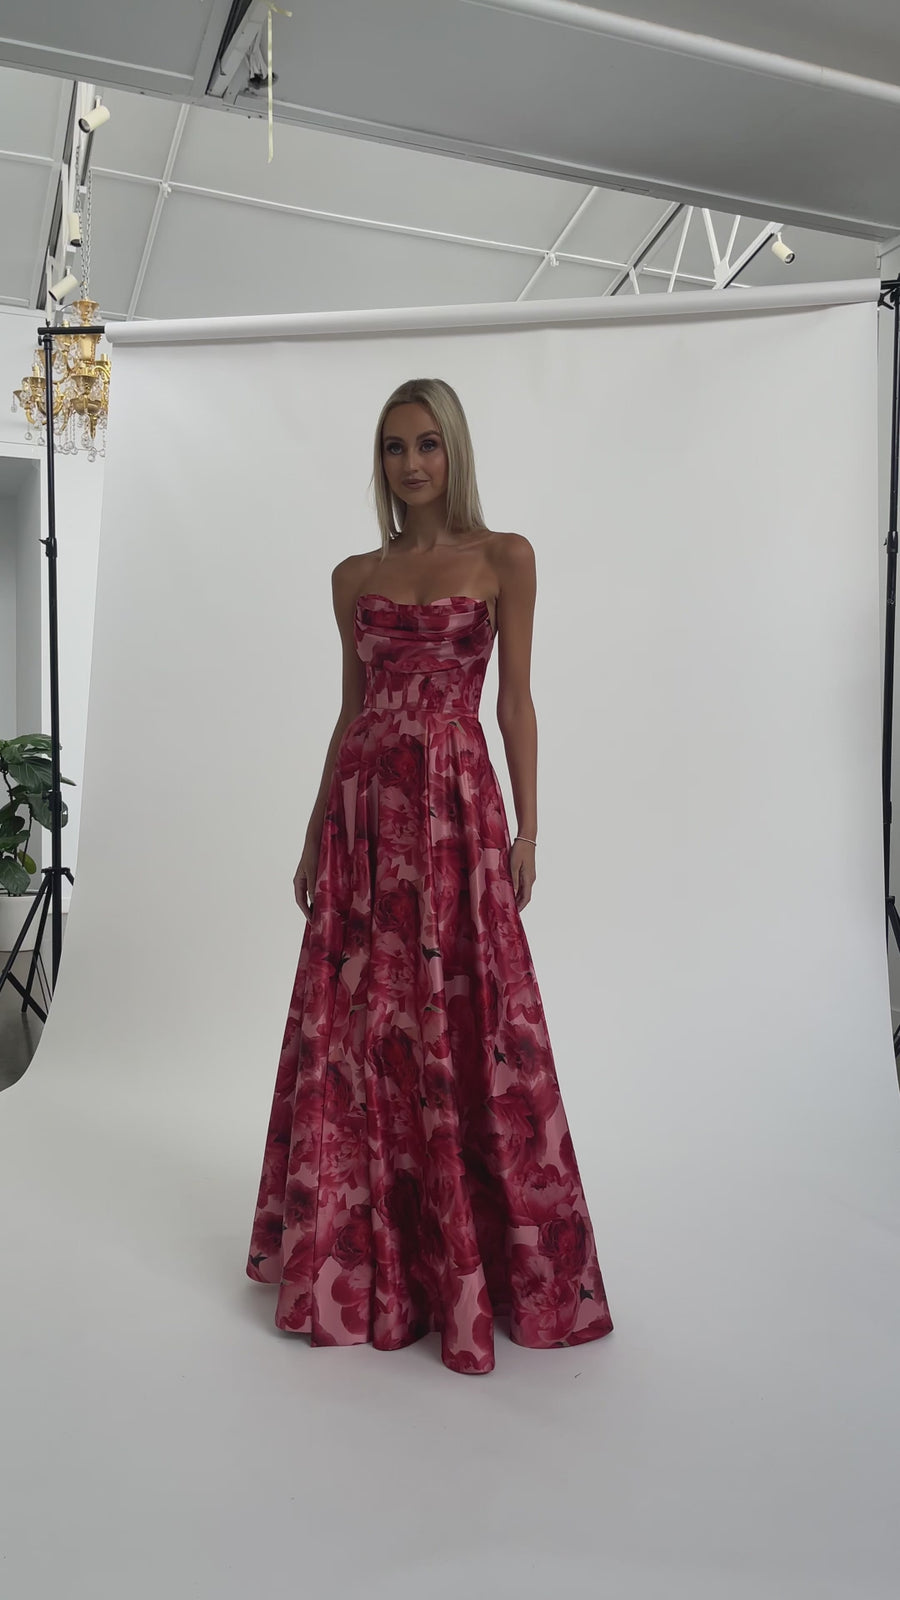 GENEVIA STRAPLESS PRINTED GOWN B67D06L